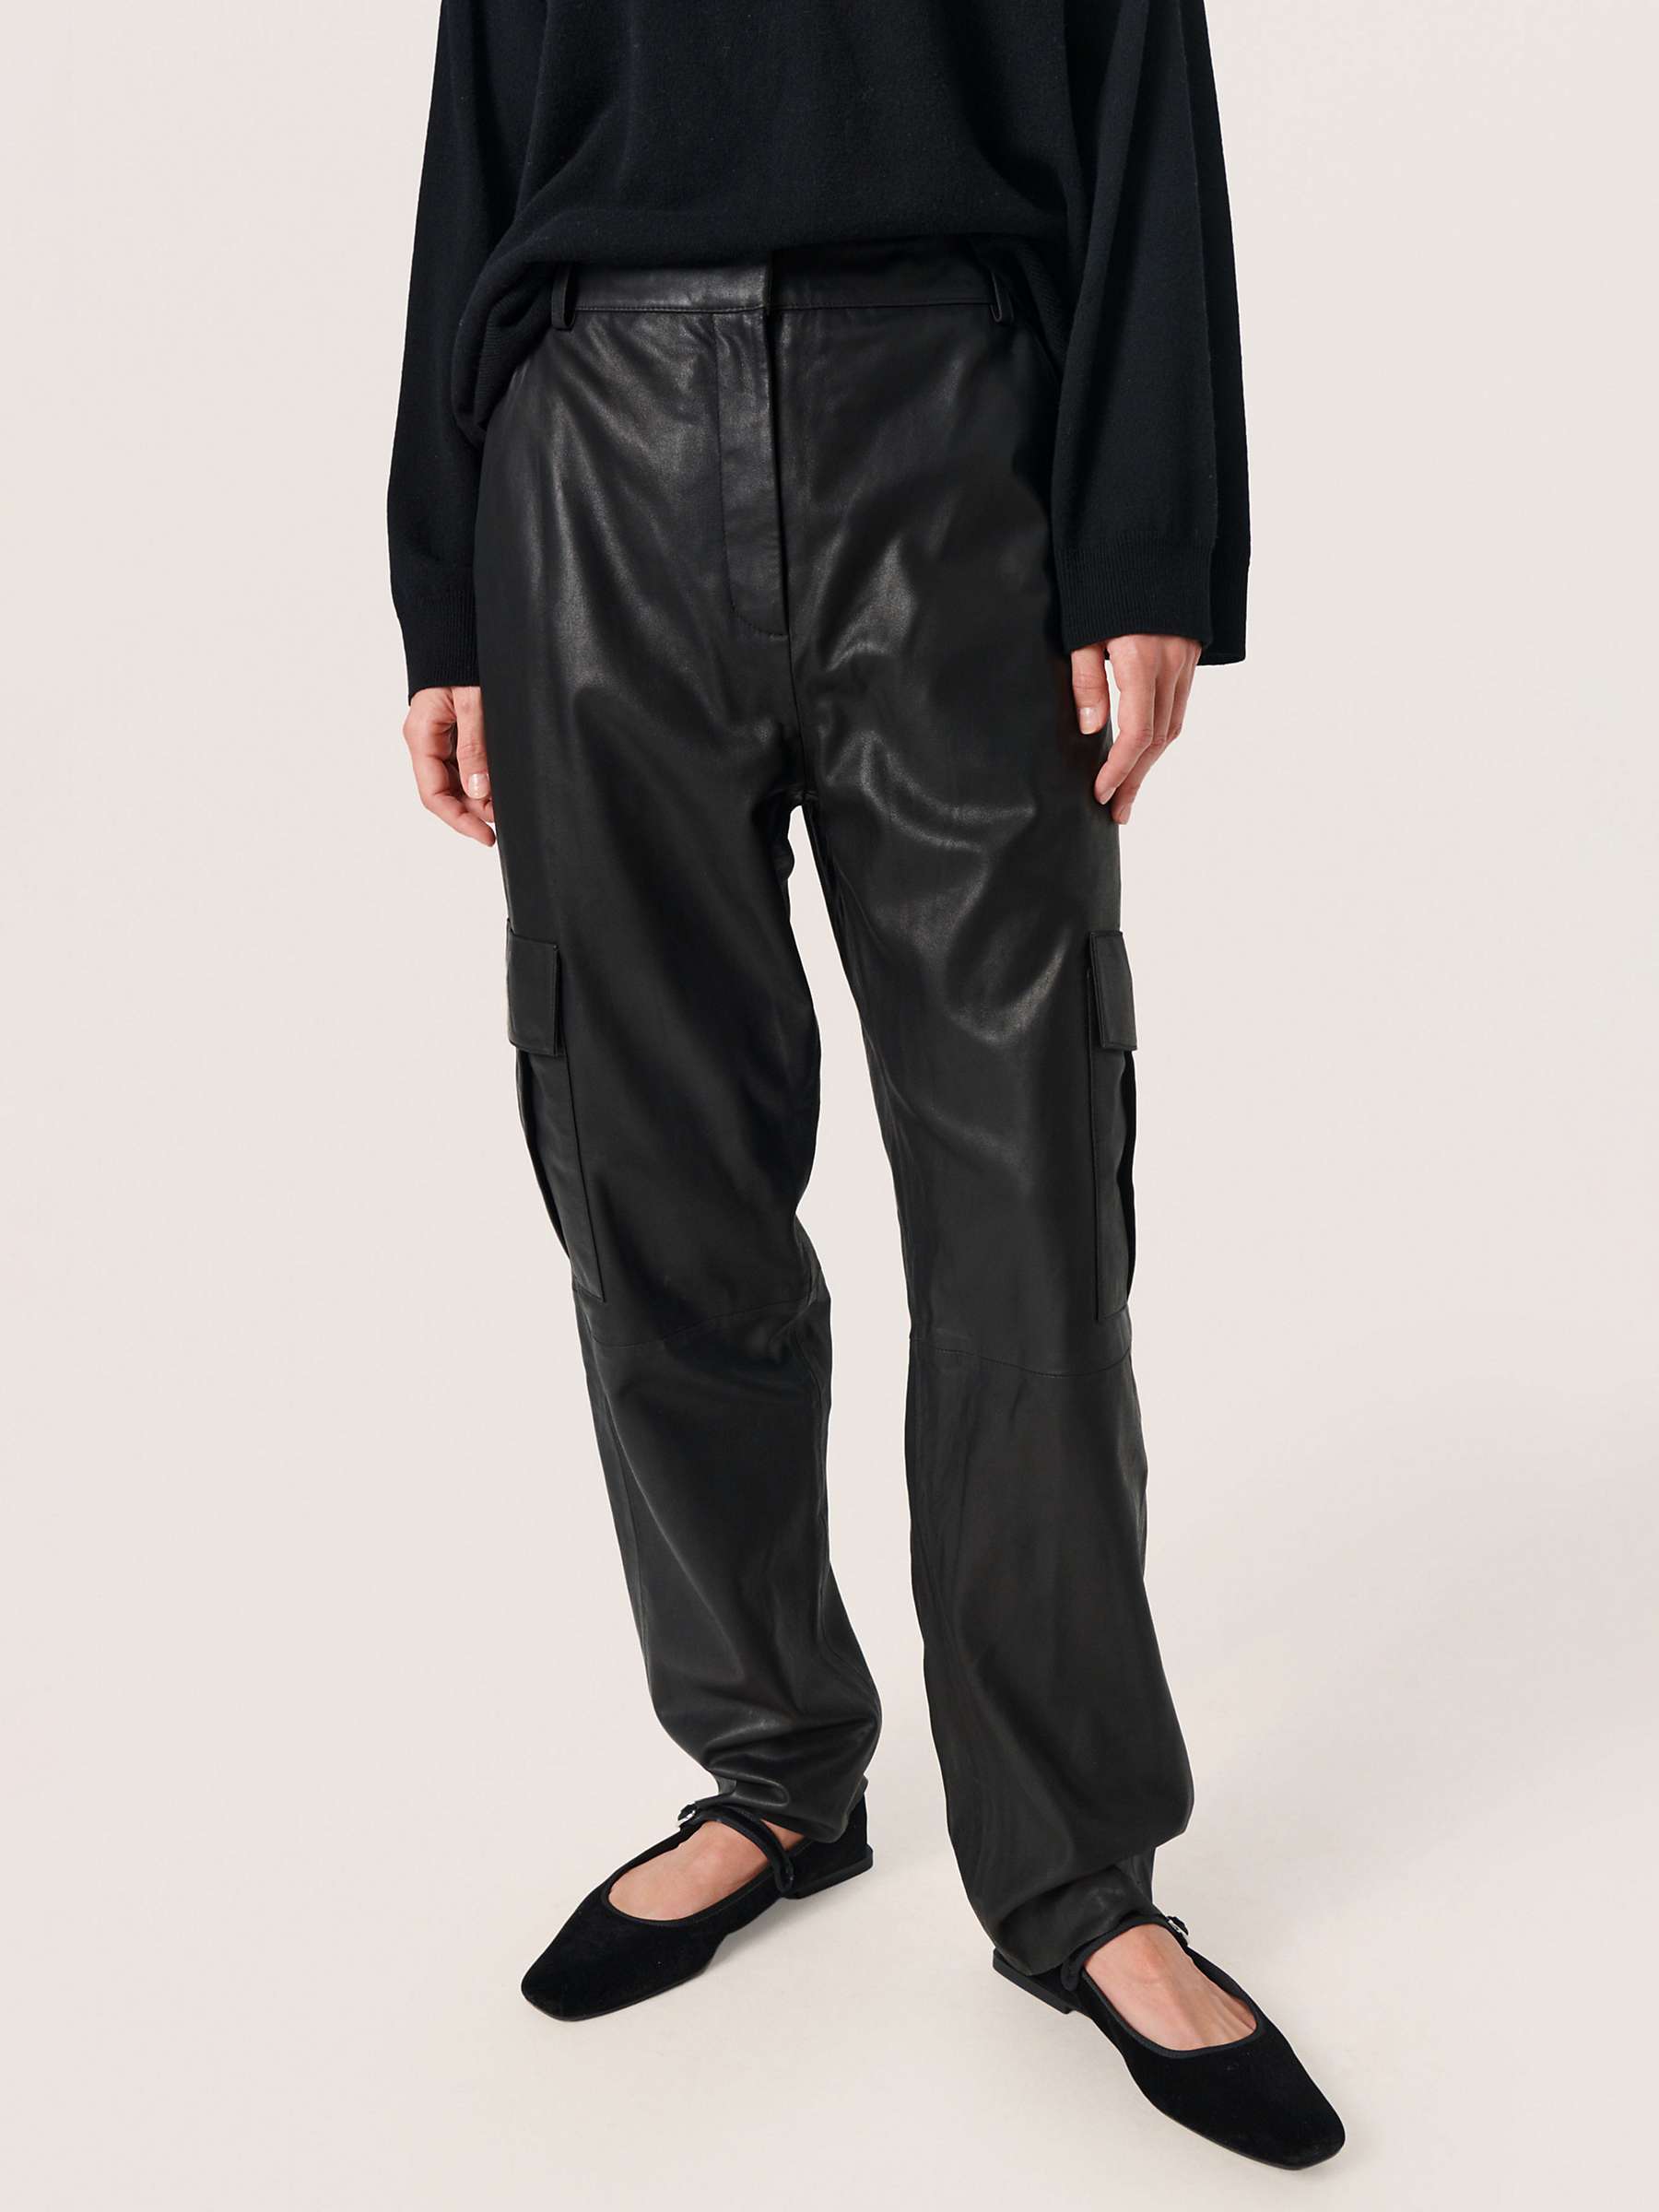 Buy Soaked In Luxury Joselyn Cargo Leather Trousers, Black Online at johnlewis.com